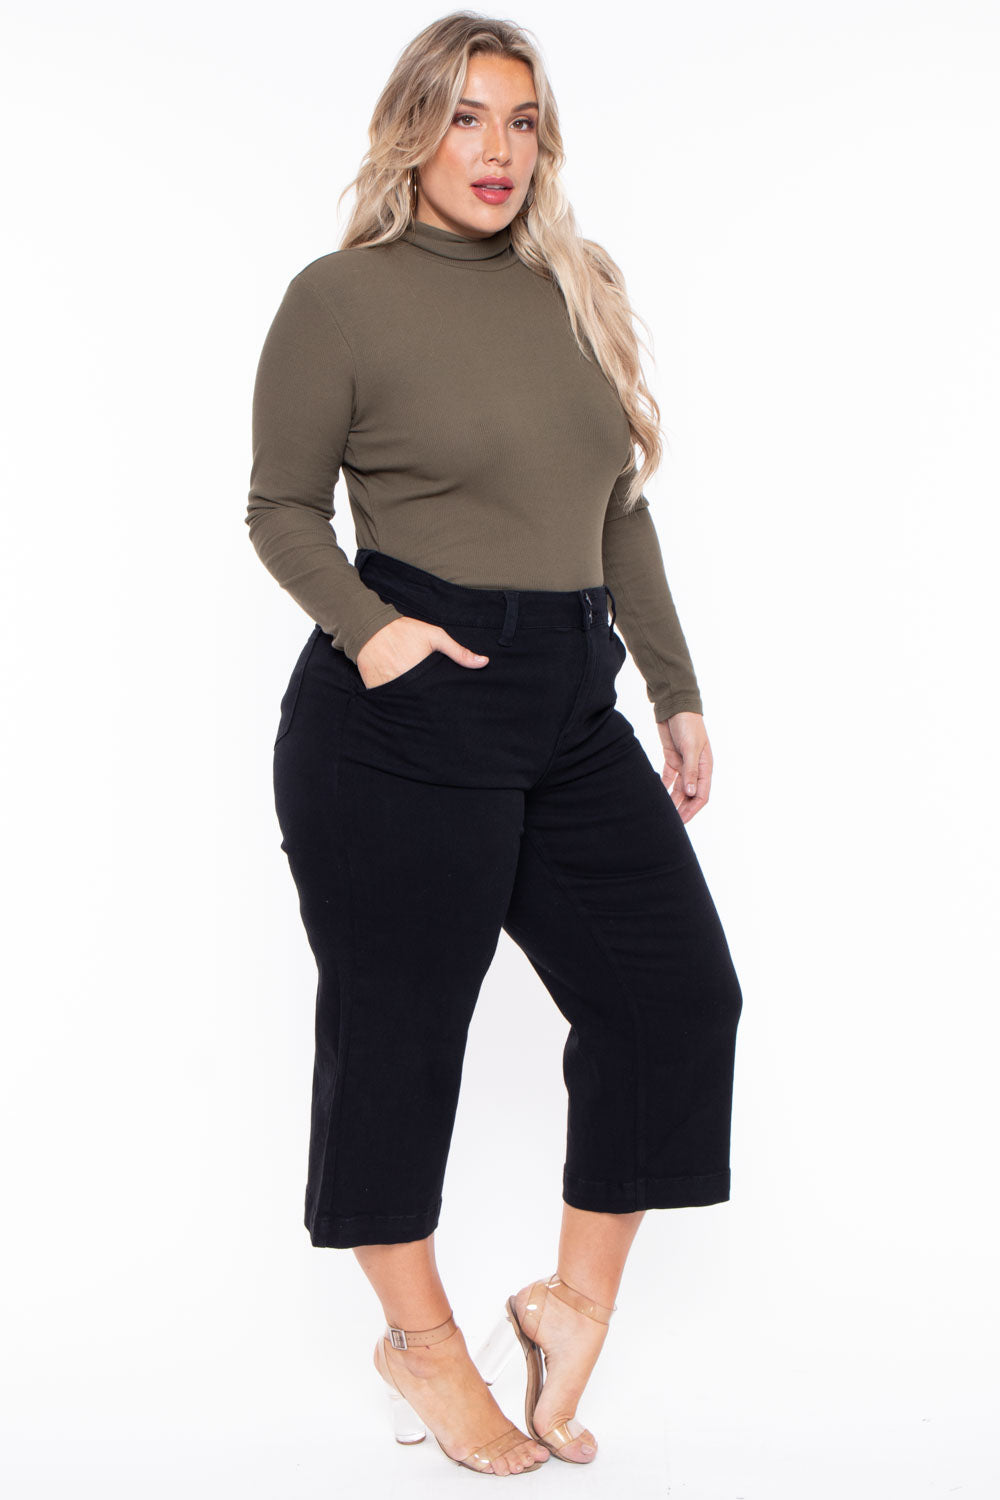 Ambiance Tops 1X / Olive Plus Size Ribbed Turtleneck Top - Olive